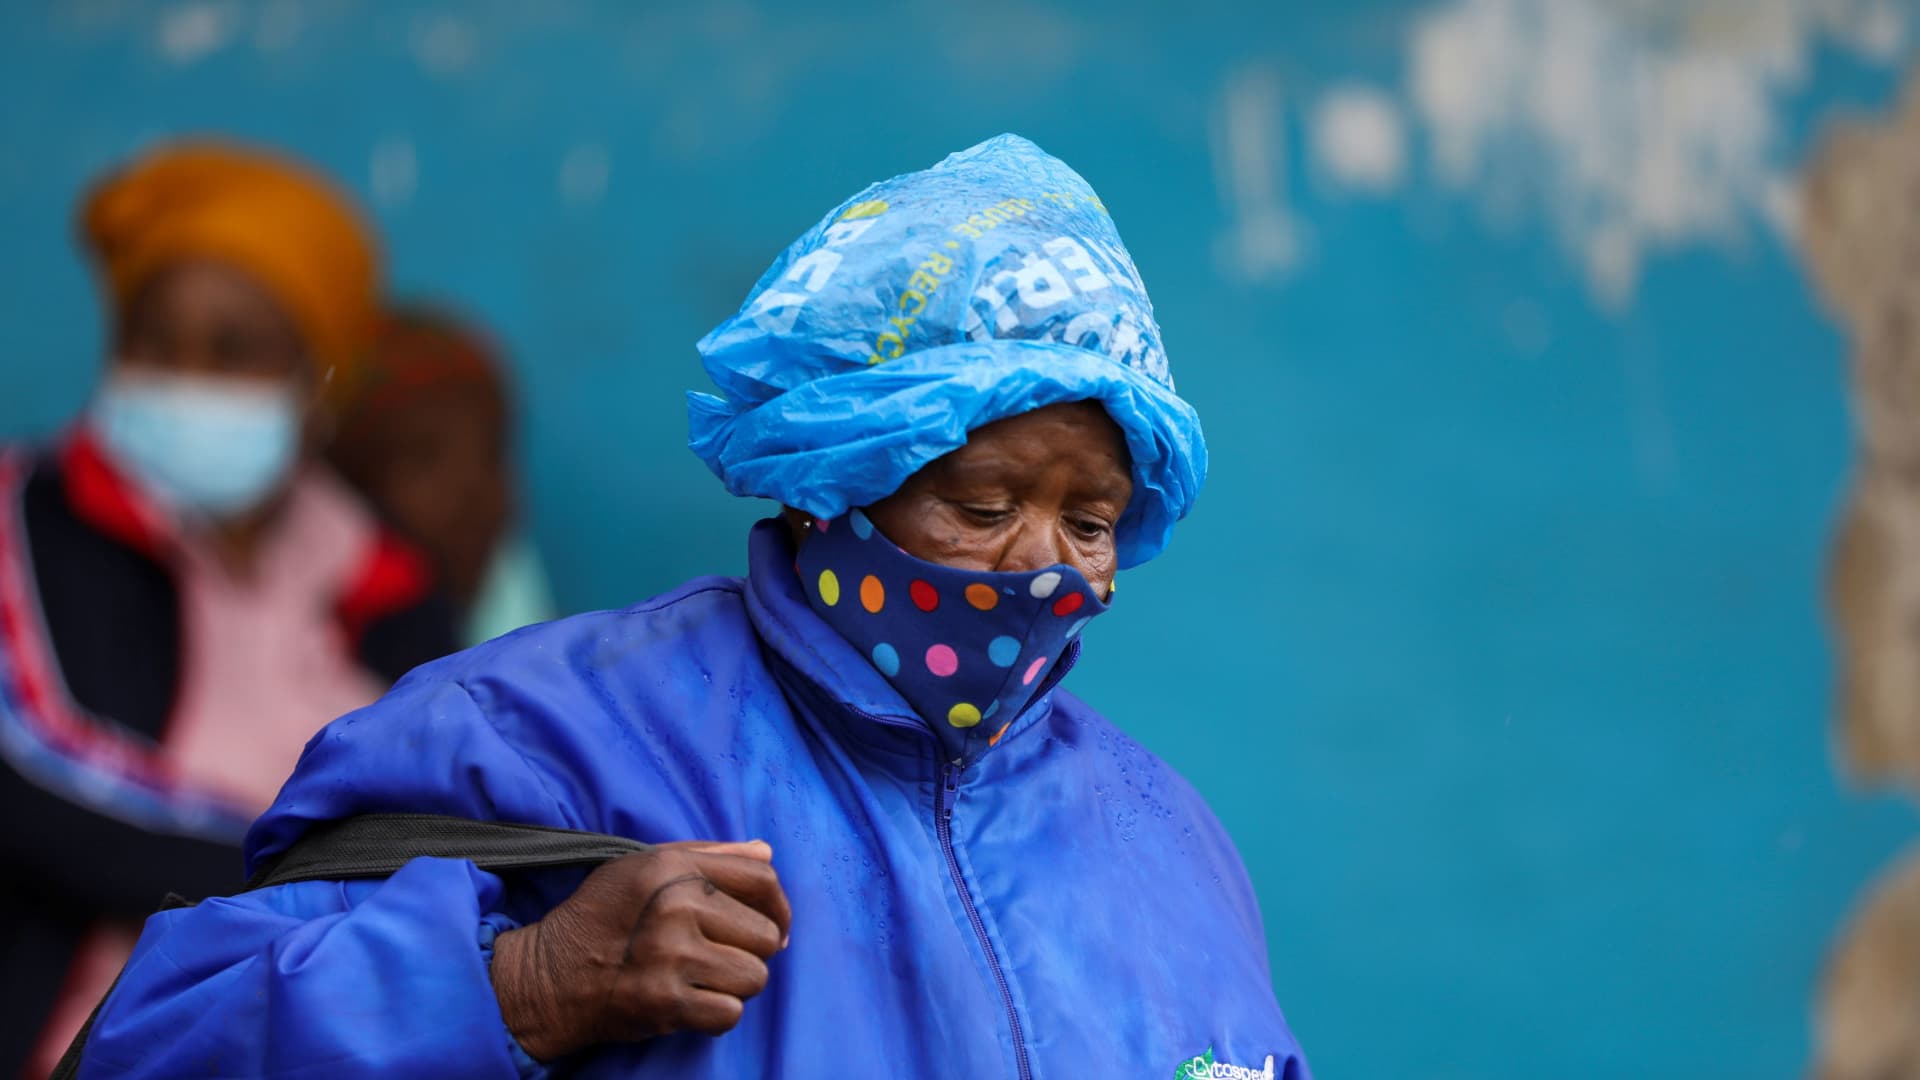 A woman wearing a protective face mask against the coronavirus disease (COVID-19) and a plastic bag on her head to protect from the rain looks on, as the new Omicron coronavirus variant spreads, at Tsomo, a town in the Eastern Cape province of South Africa, December 2, 2021.